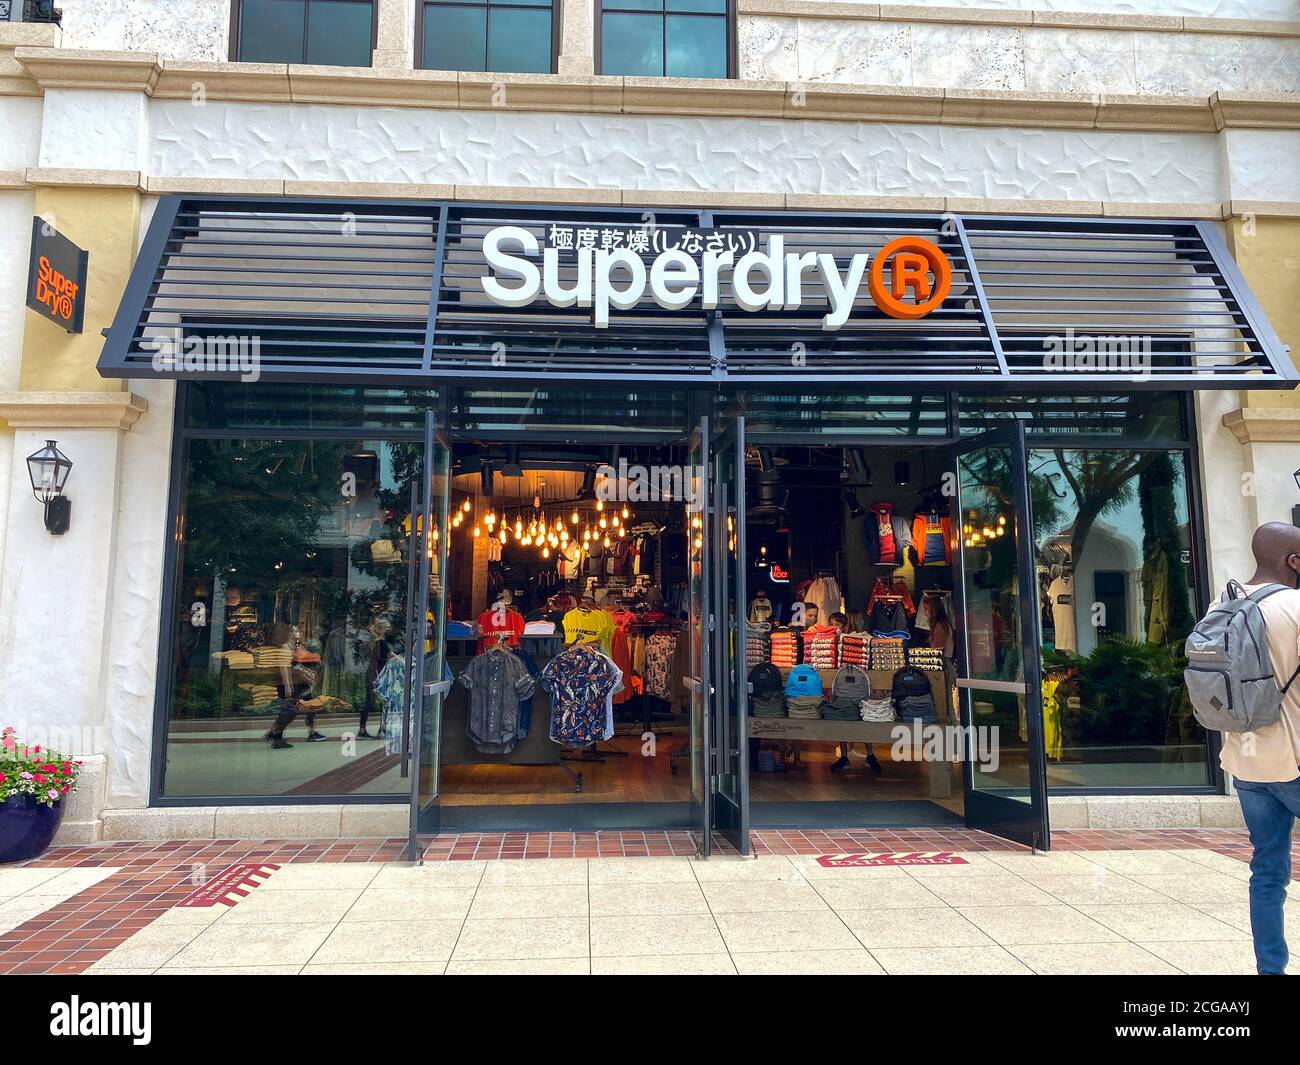 Orlando, FL/USA-6/13/20: The exterior of the Superdry clothing store in  Orlando, FL Stock Photo - Alamy